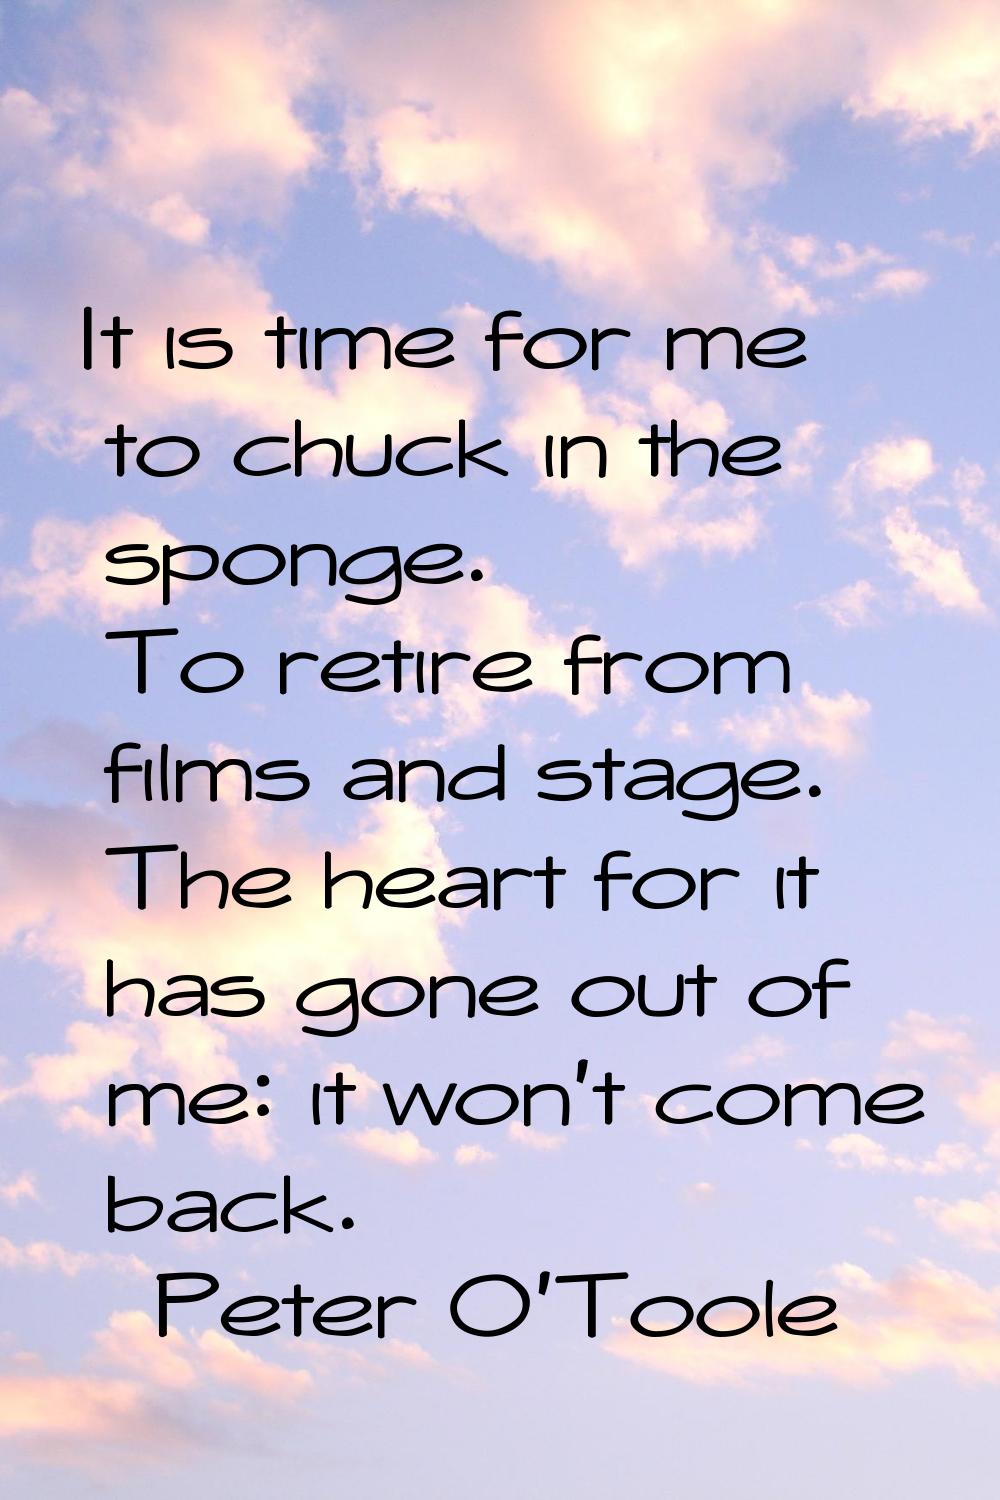 It is time for me to chuck in the sponge. To retire from films and stage. The heart for it has gone